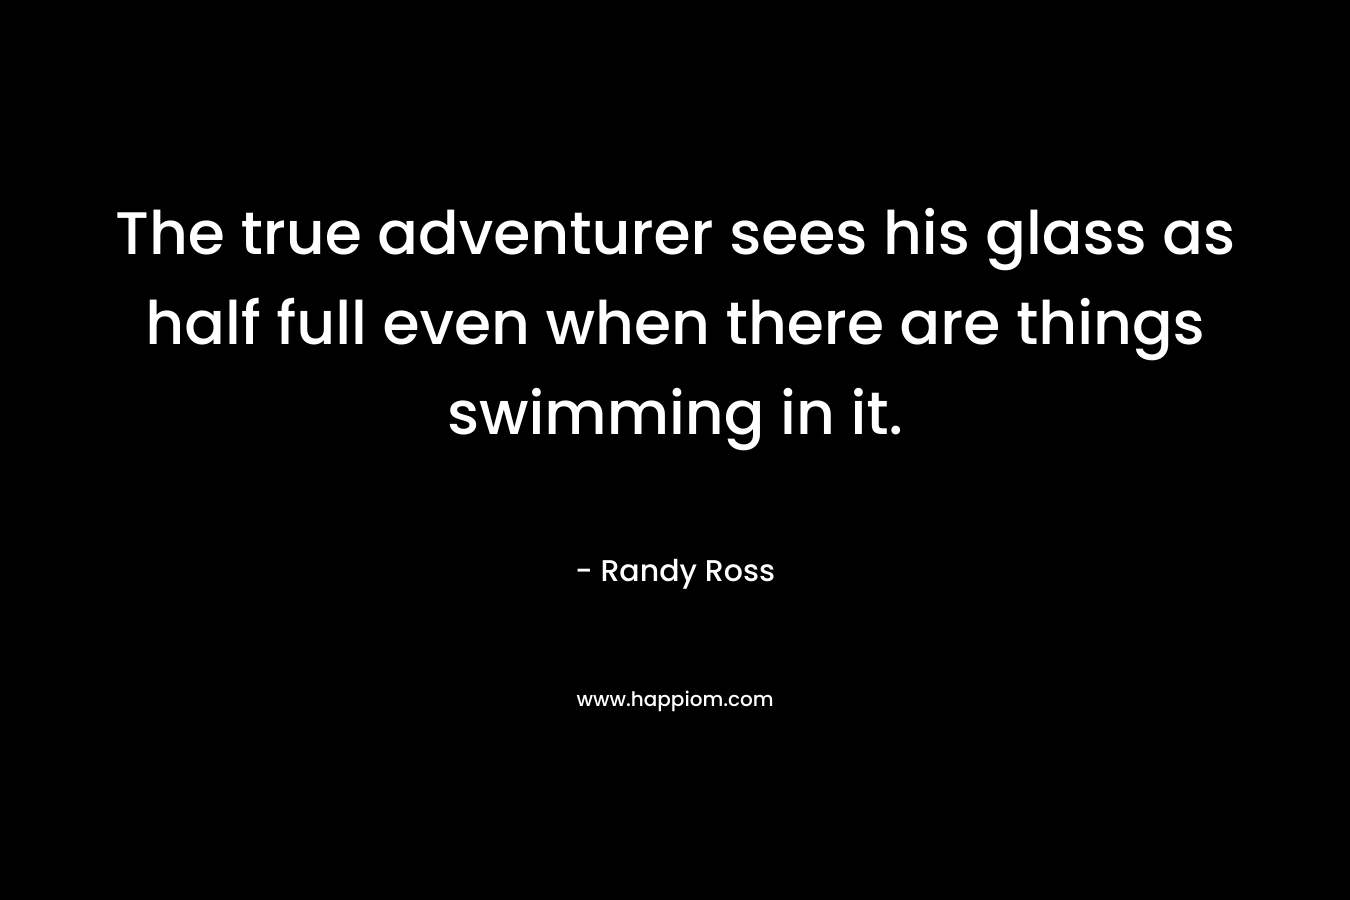 The true adventurer sees his glass as half full even when there are things swimming in it. – Randy Ross